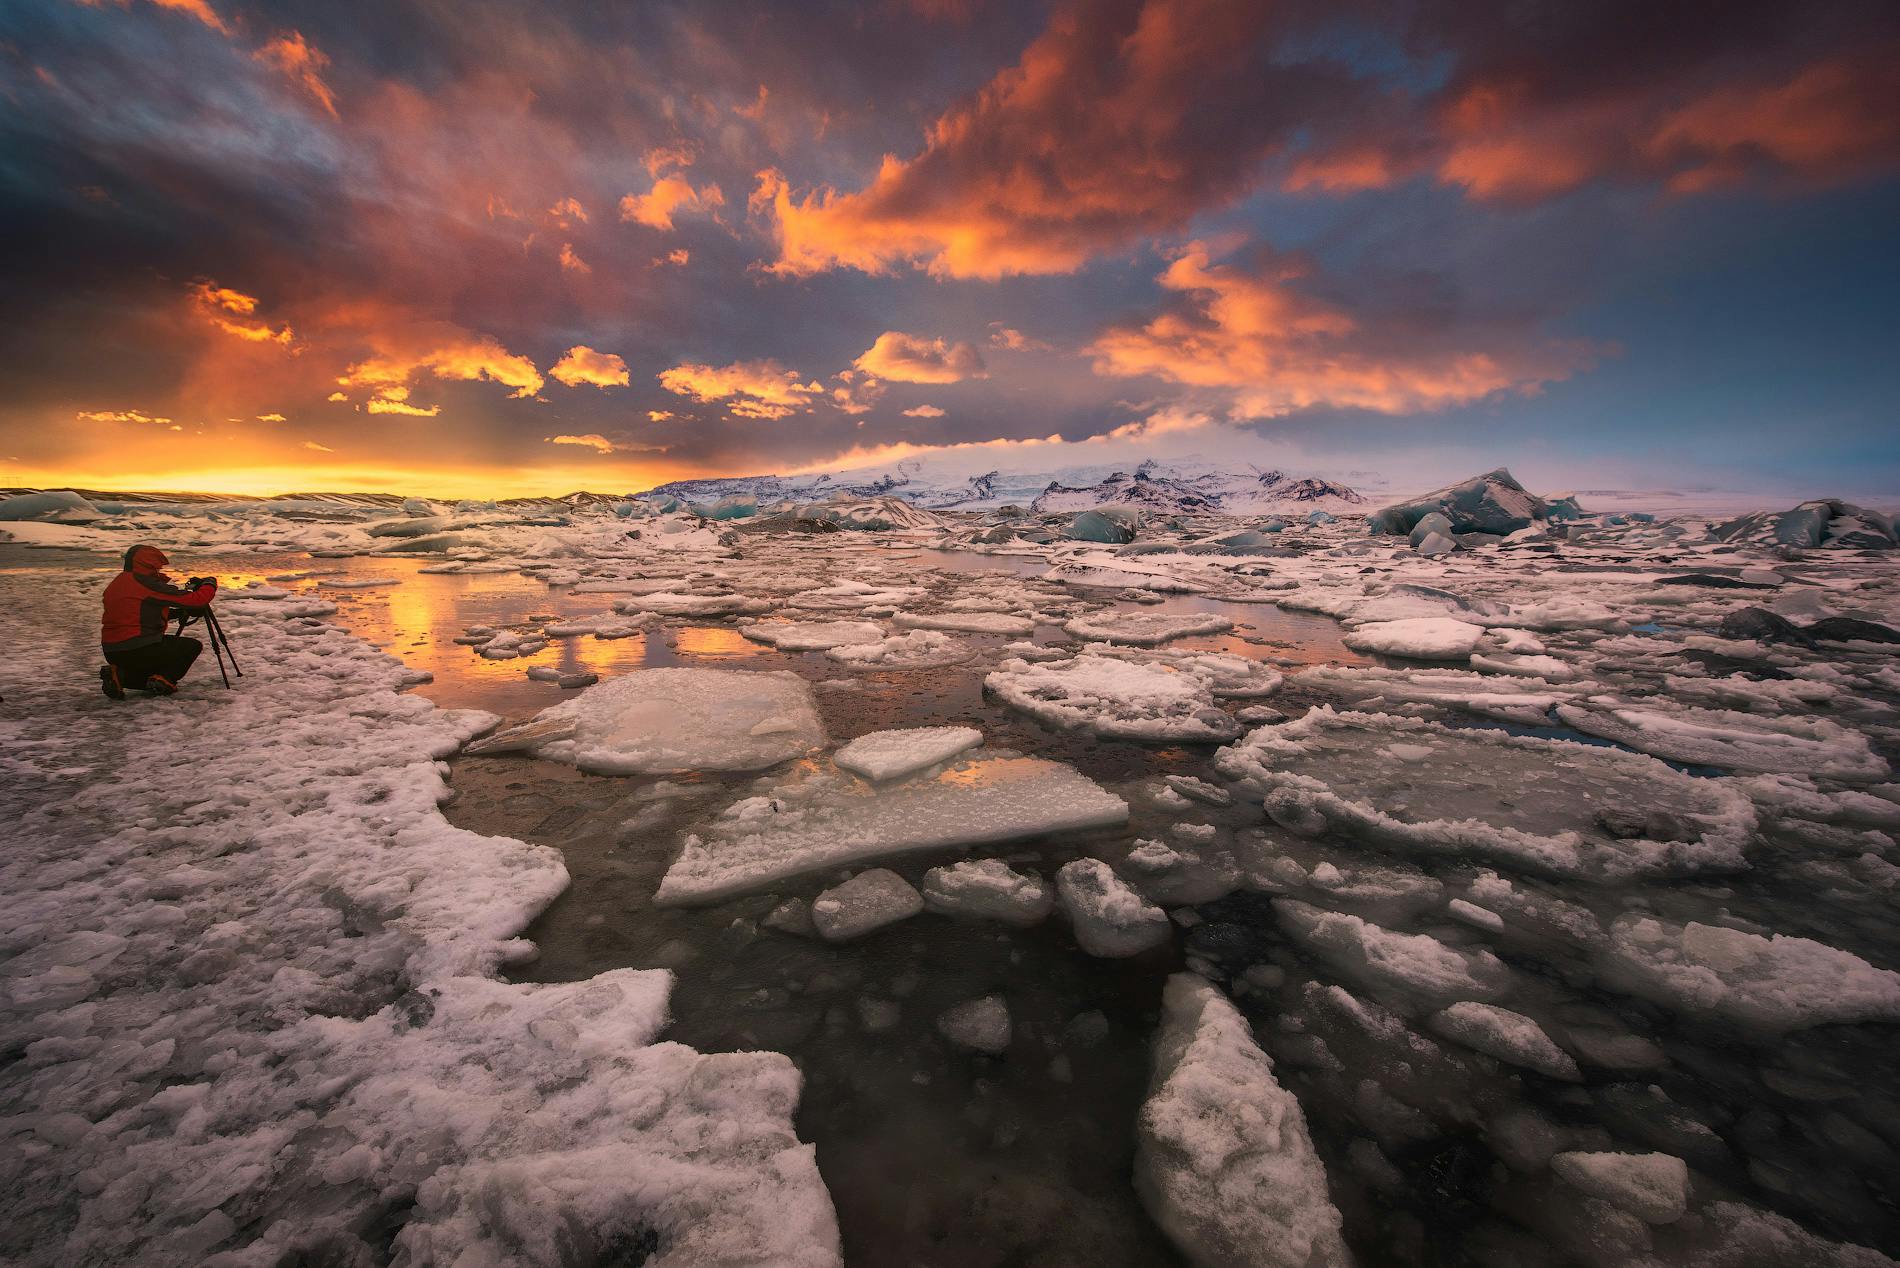 Jökulsárlón glacier lagoon is one of the most beautiful sites in the whole of Iceland.